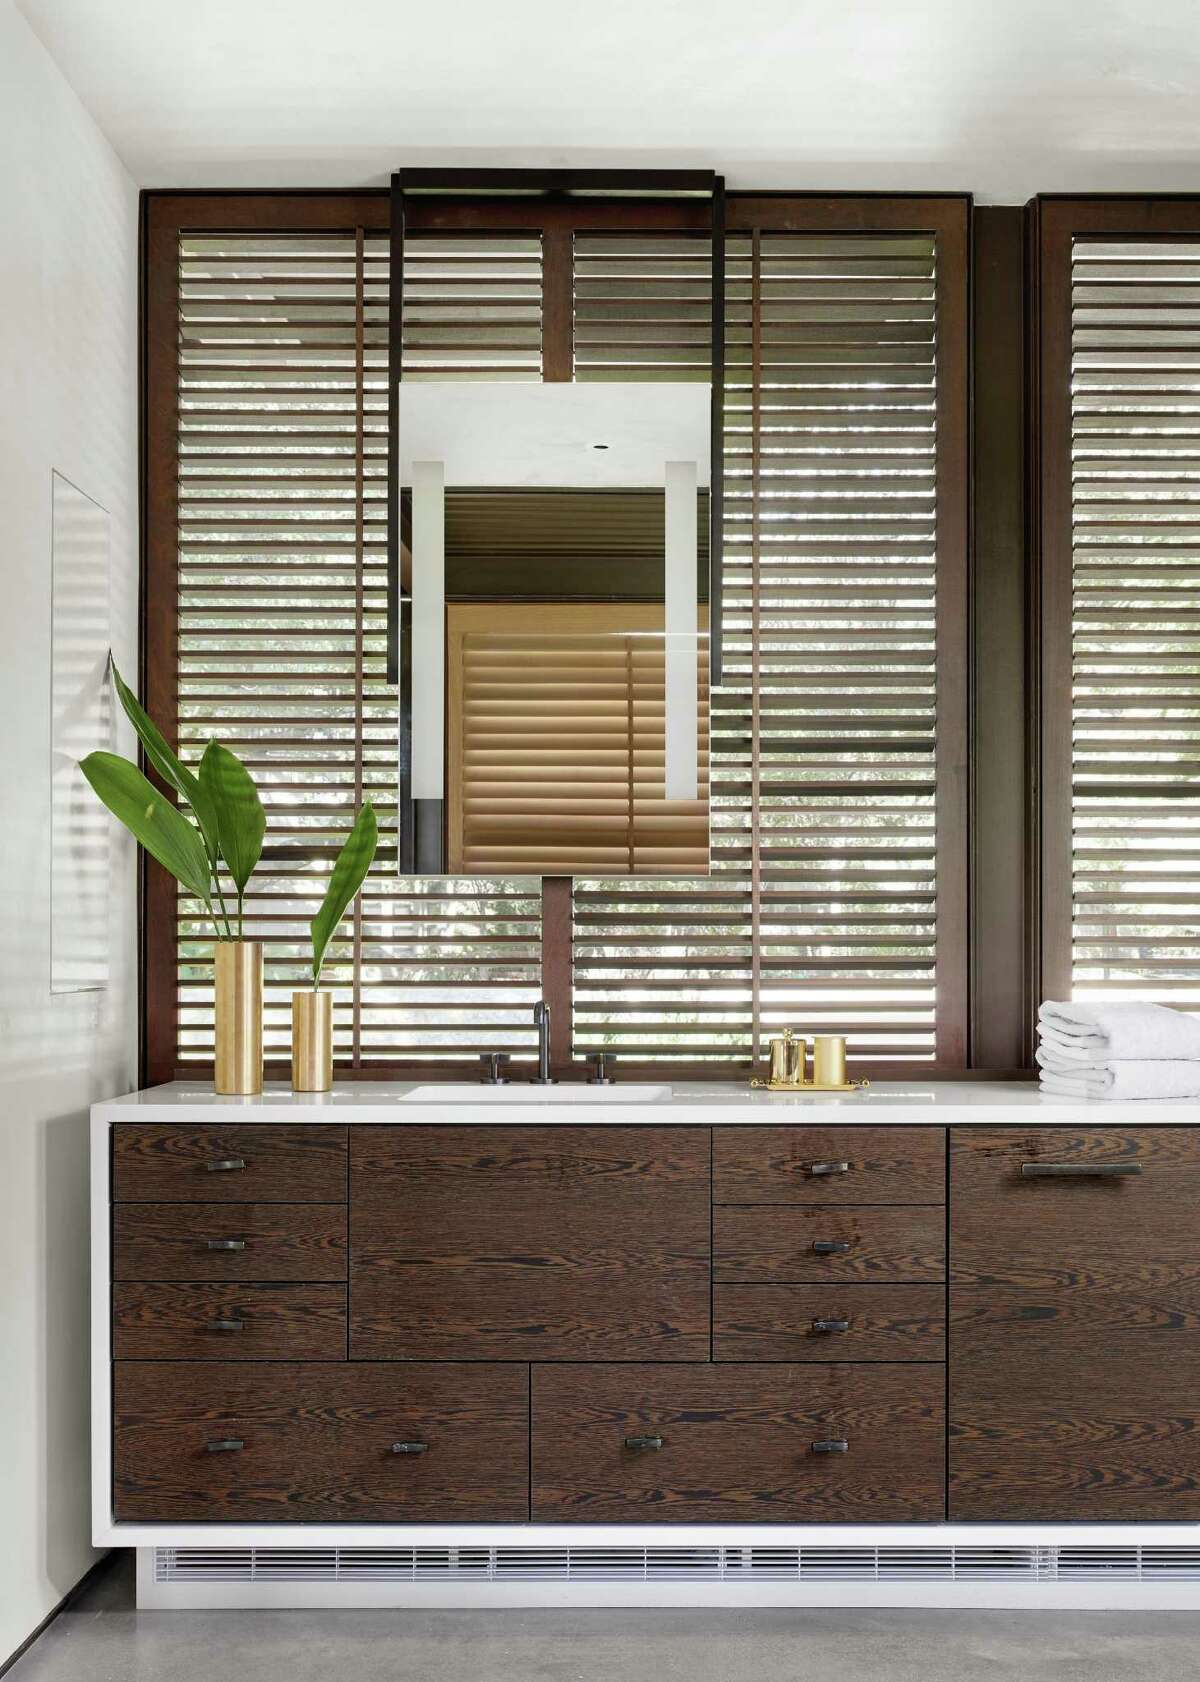 Wood has become a popular, if, perhaps, unintuitive, material sometimes used in master bathrooms. Properly sealed and maintained, woods such as white oak and mesquite not only look luxurious, but theyll also be able to withstand the rigors (and humidity) of a master bath for many years.